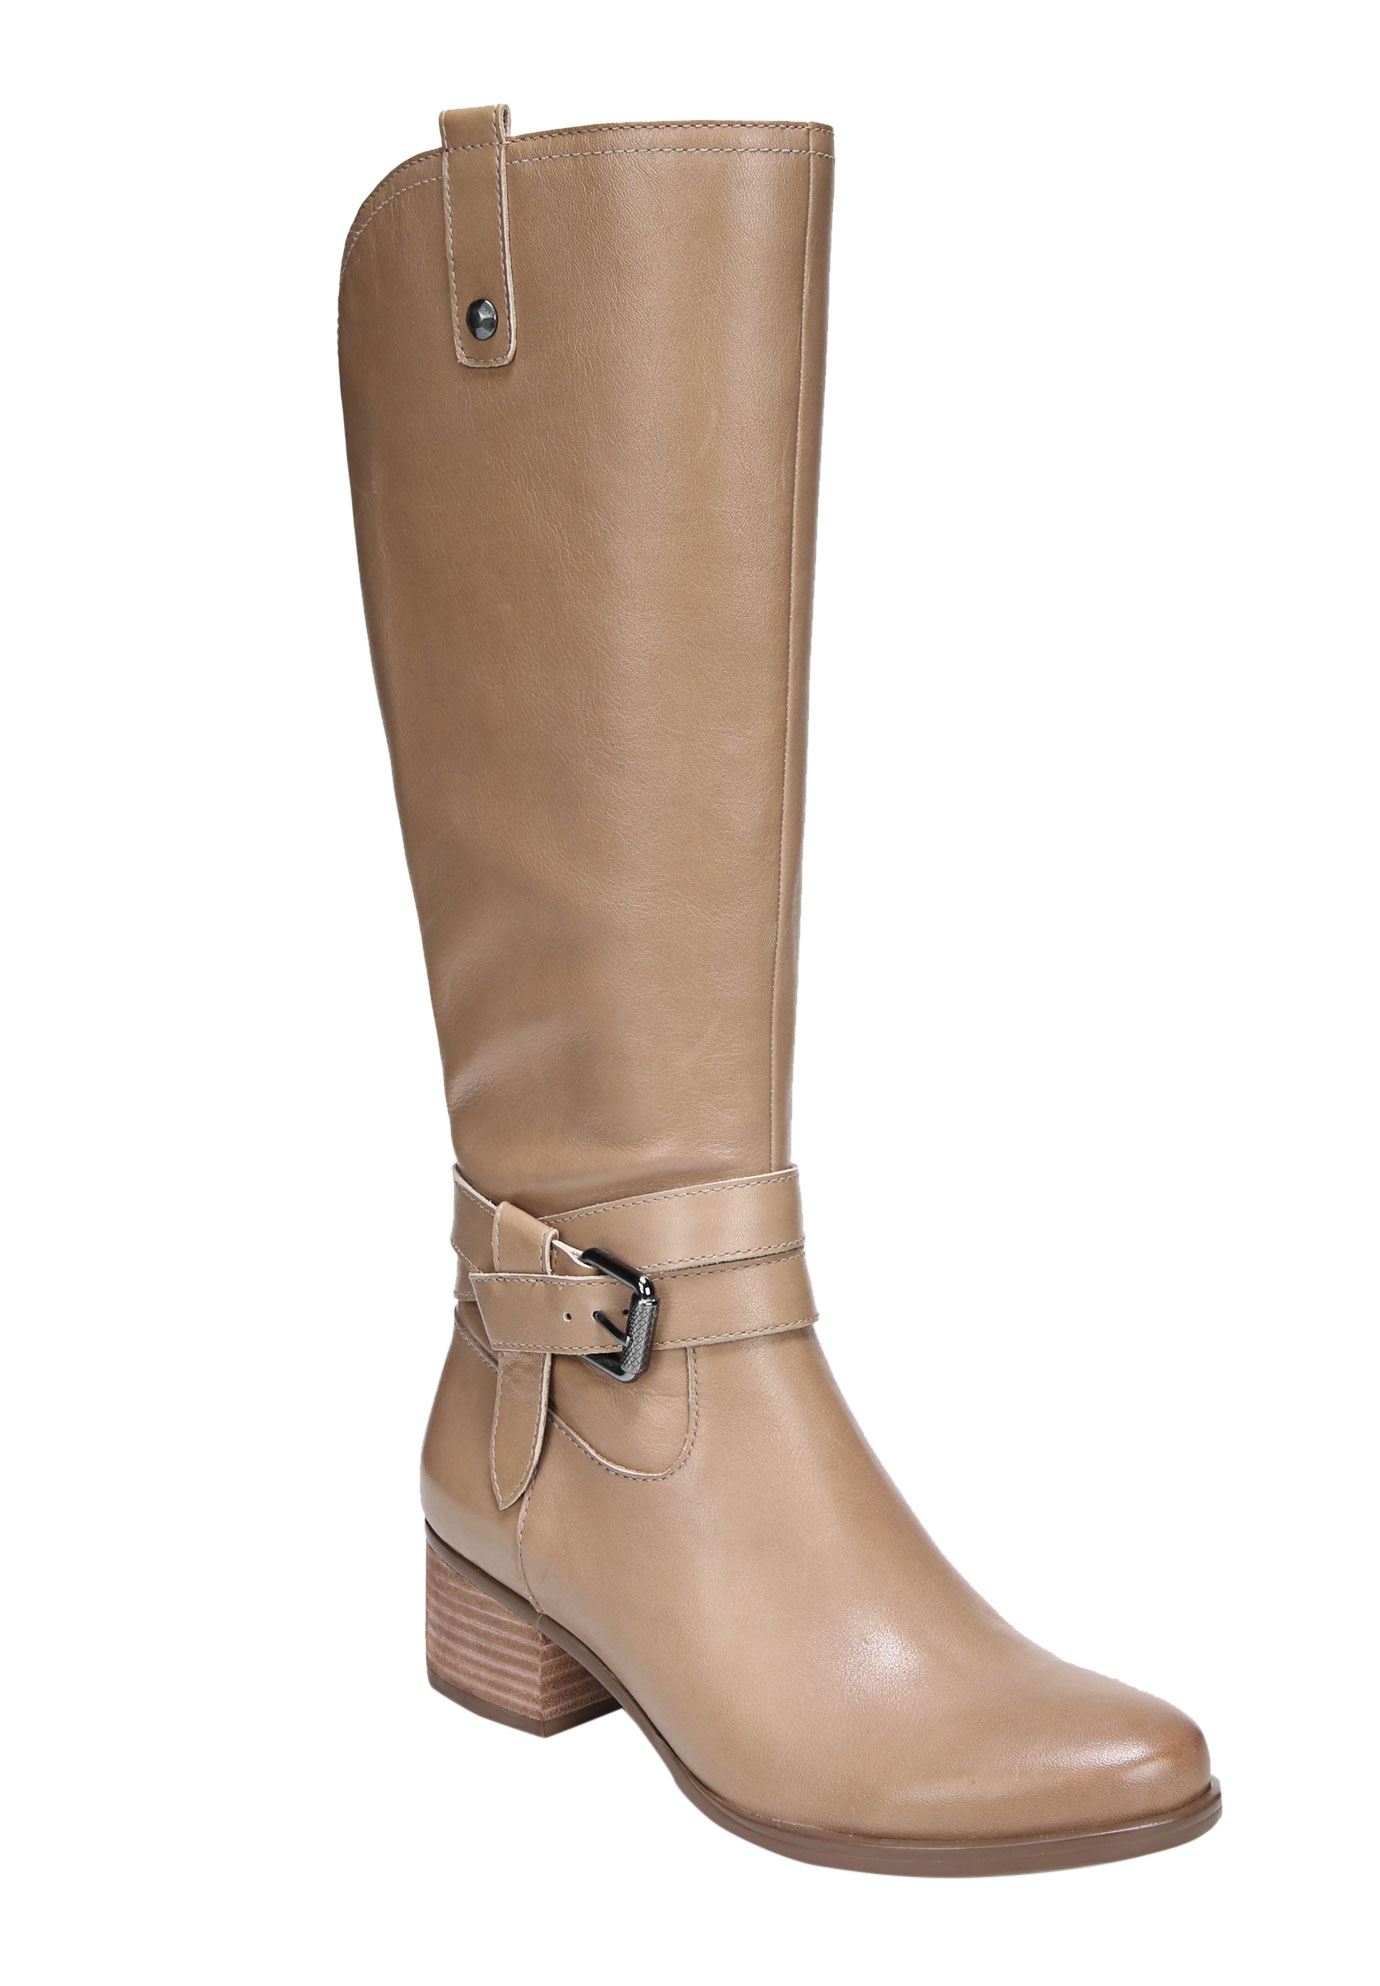 Dev Wide Calf Boots By Naturalizer® Plus Size Tall Boots Jessica London 